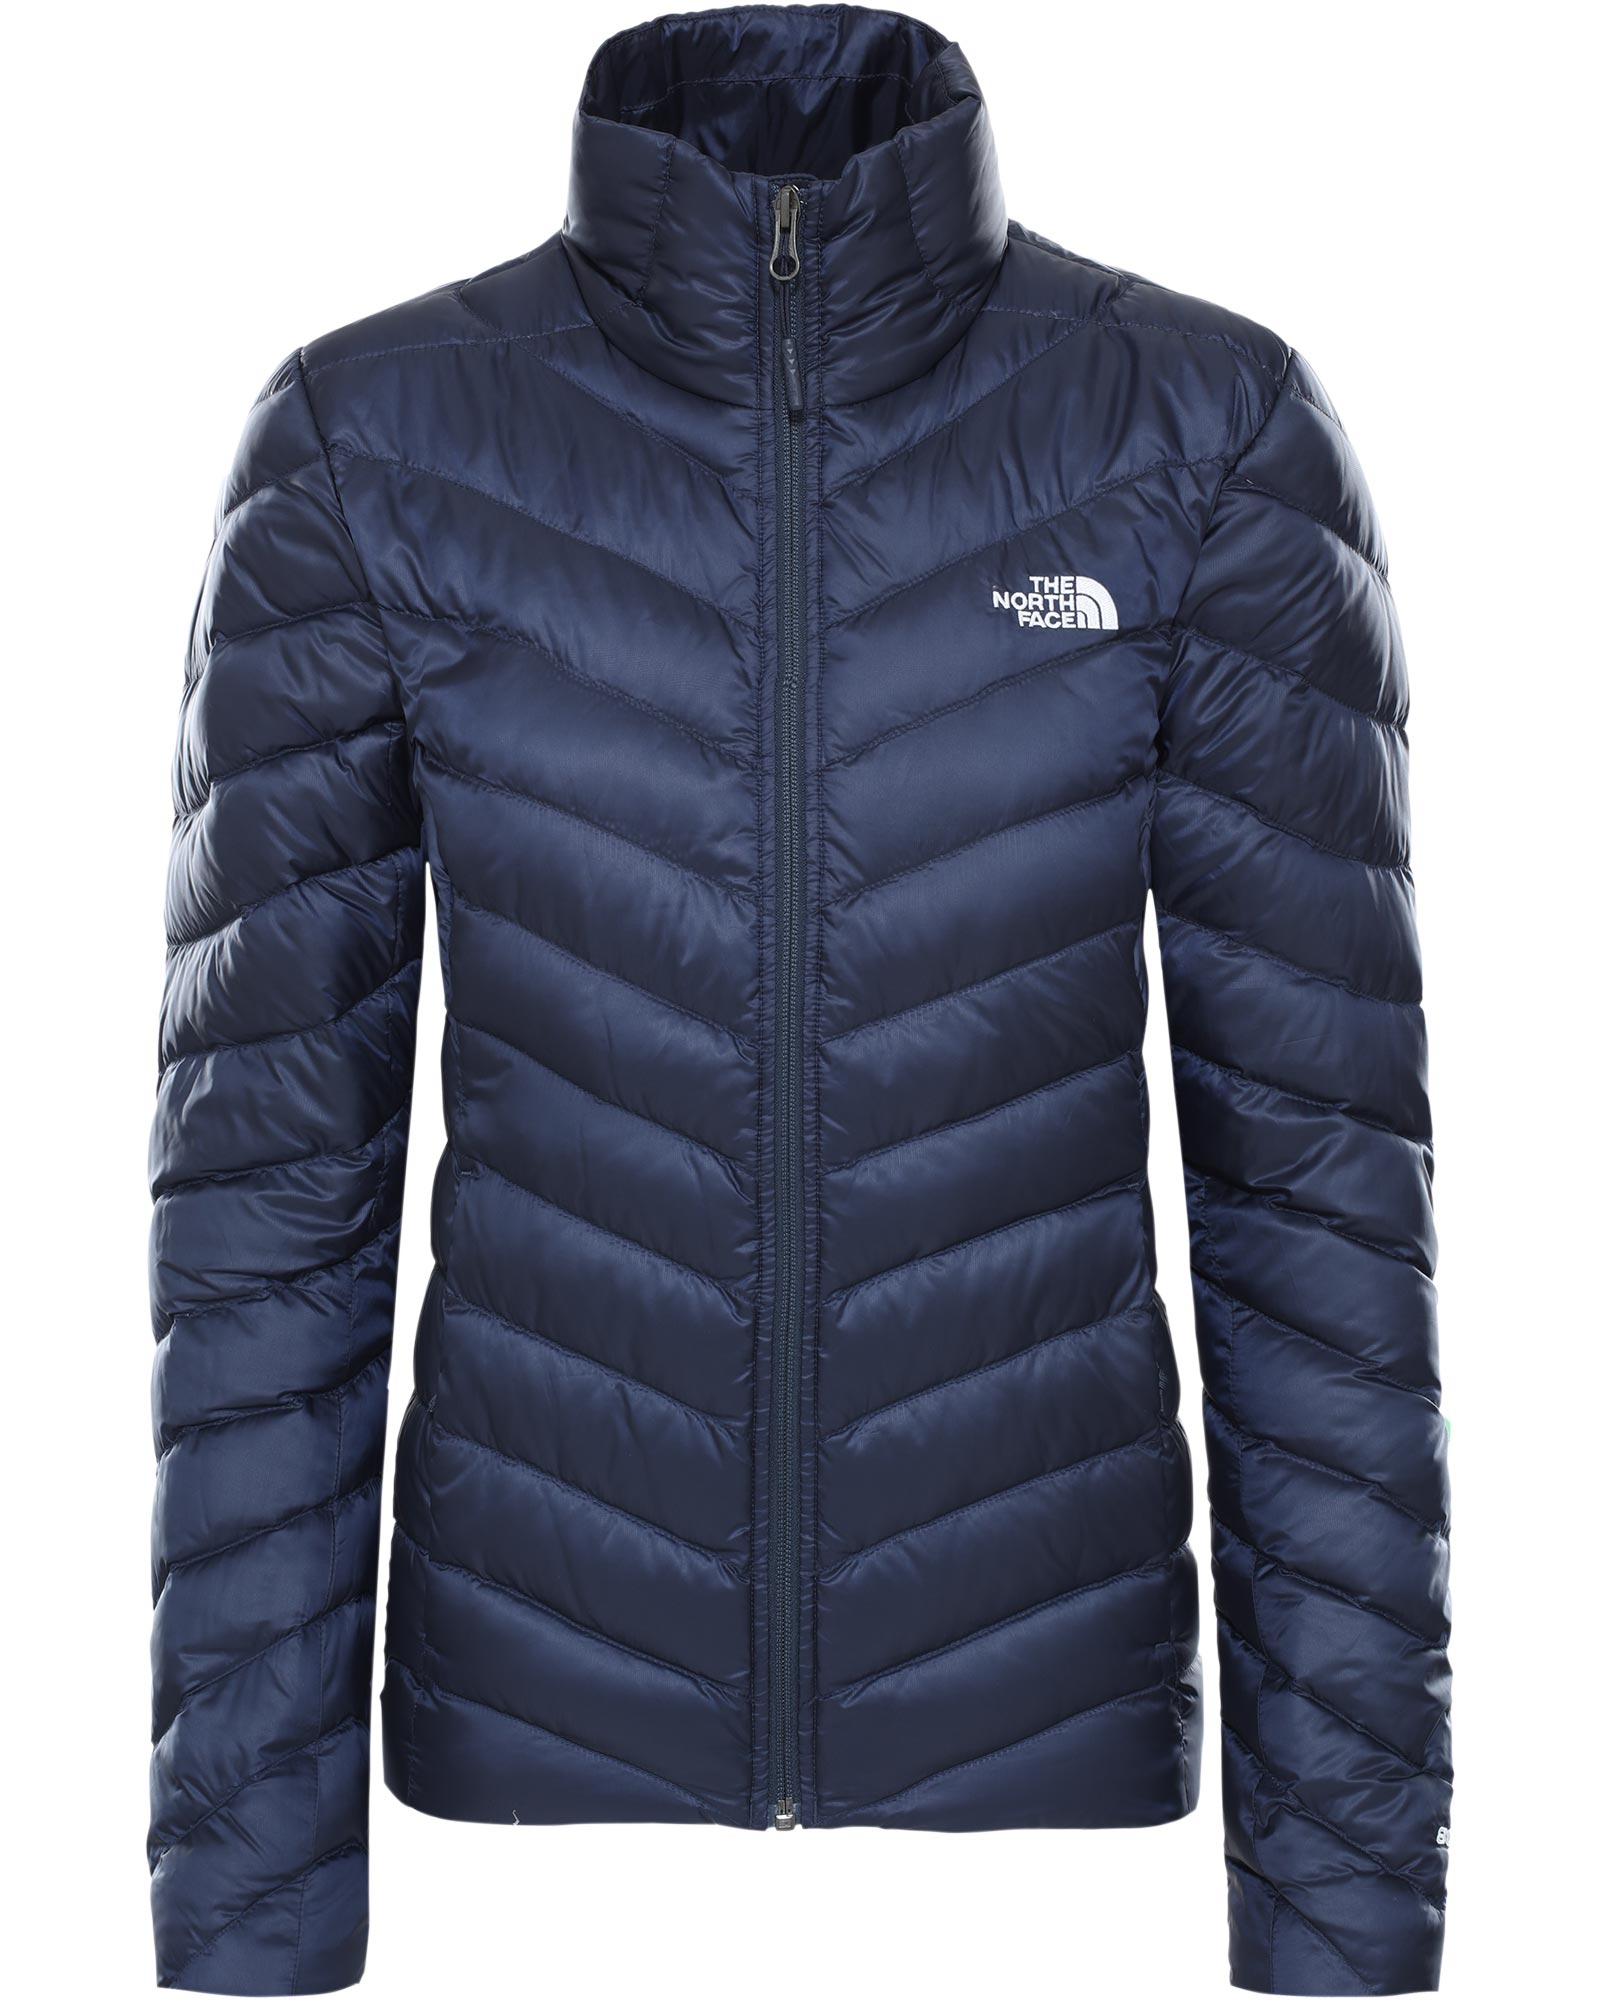 The North Face Trevail Women’s Jacket - Urban Navy S